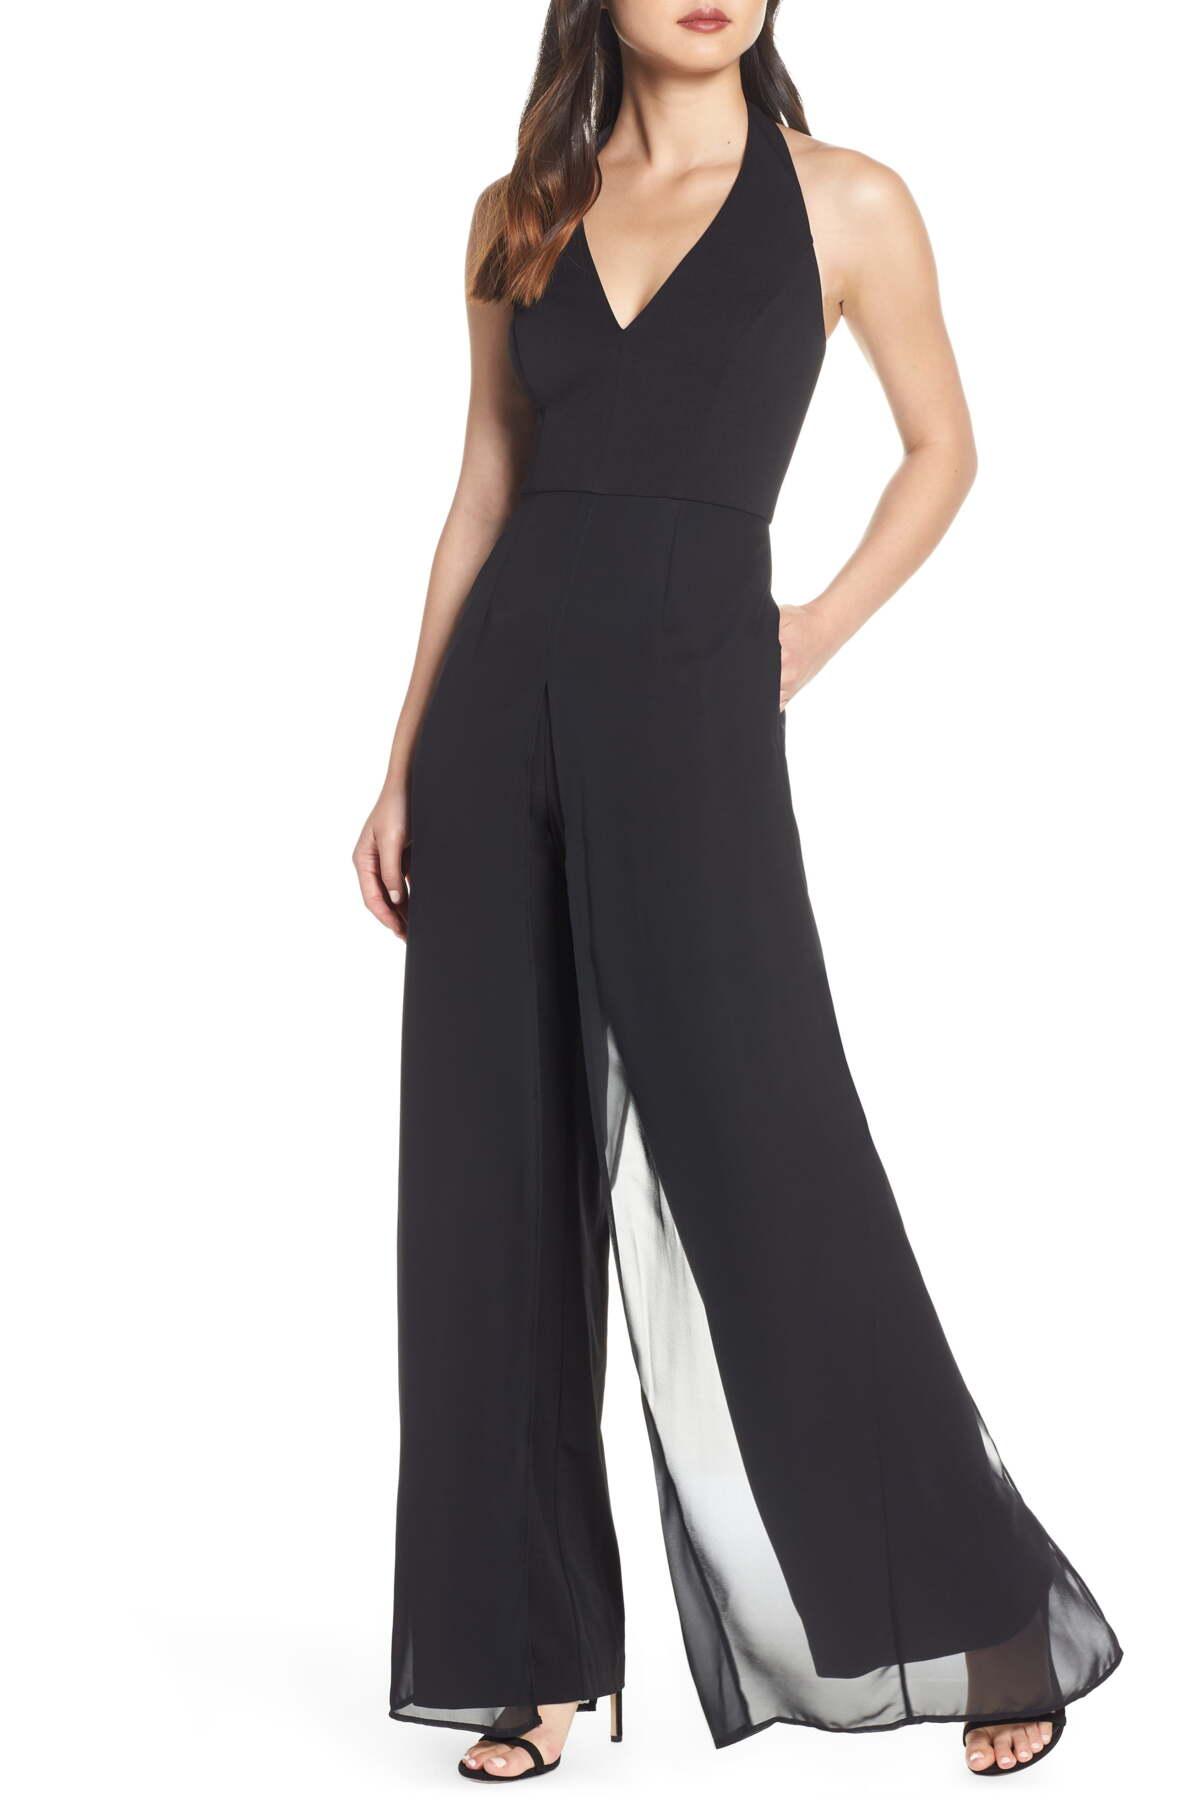 Limited Forord Produktionscenter Adrianna Papell Halter Neck Chiffon Overlay Jumpsuit in Black | Lyst